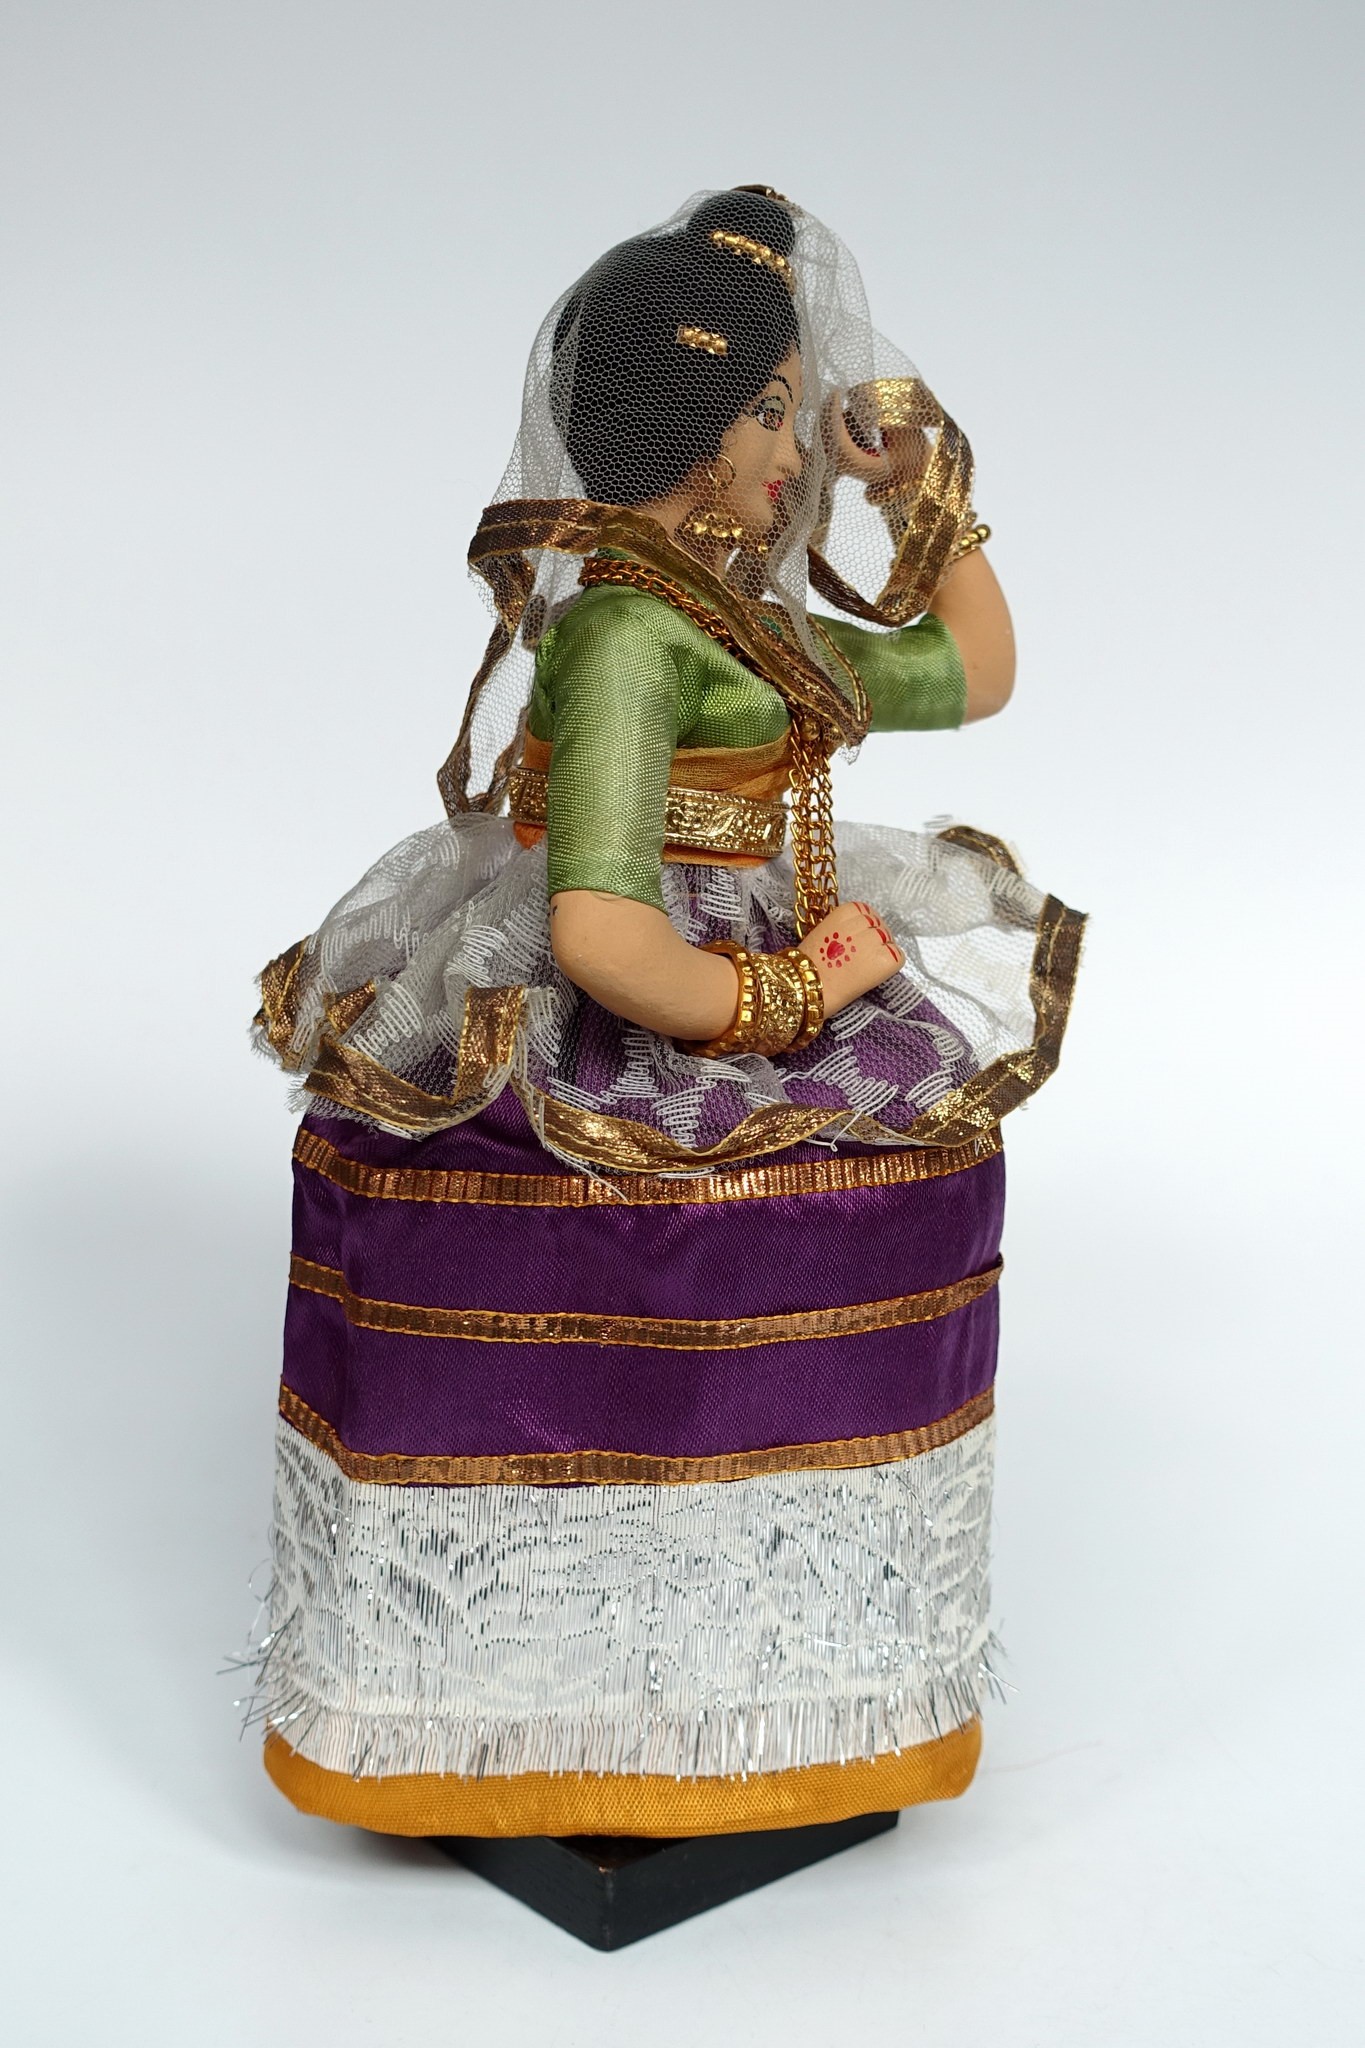 India Doll Manipuri Dancer | National costume dolls from all over